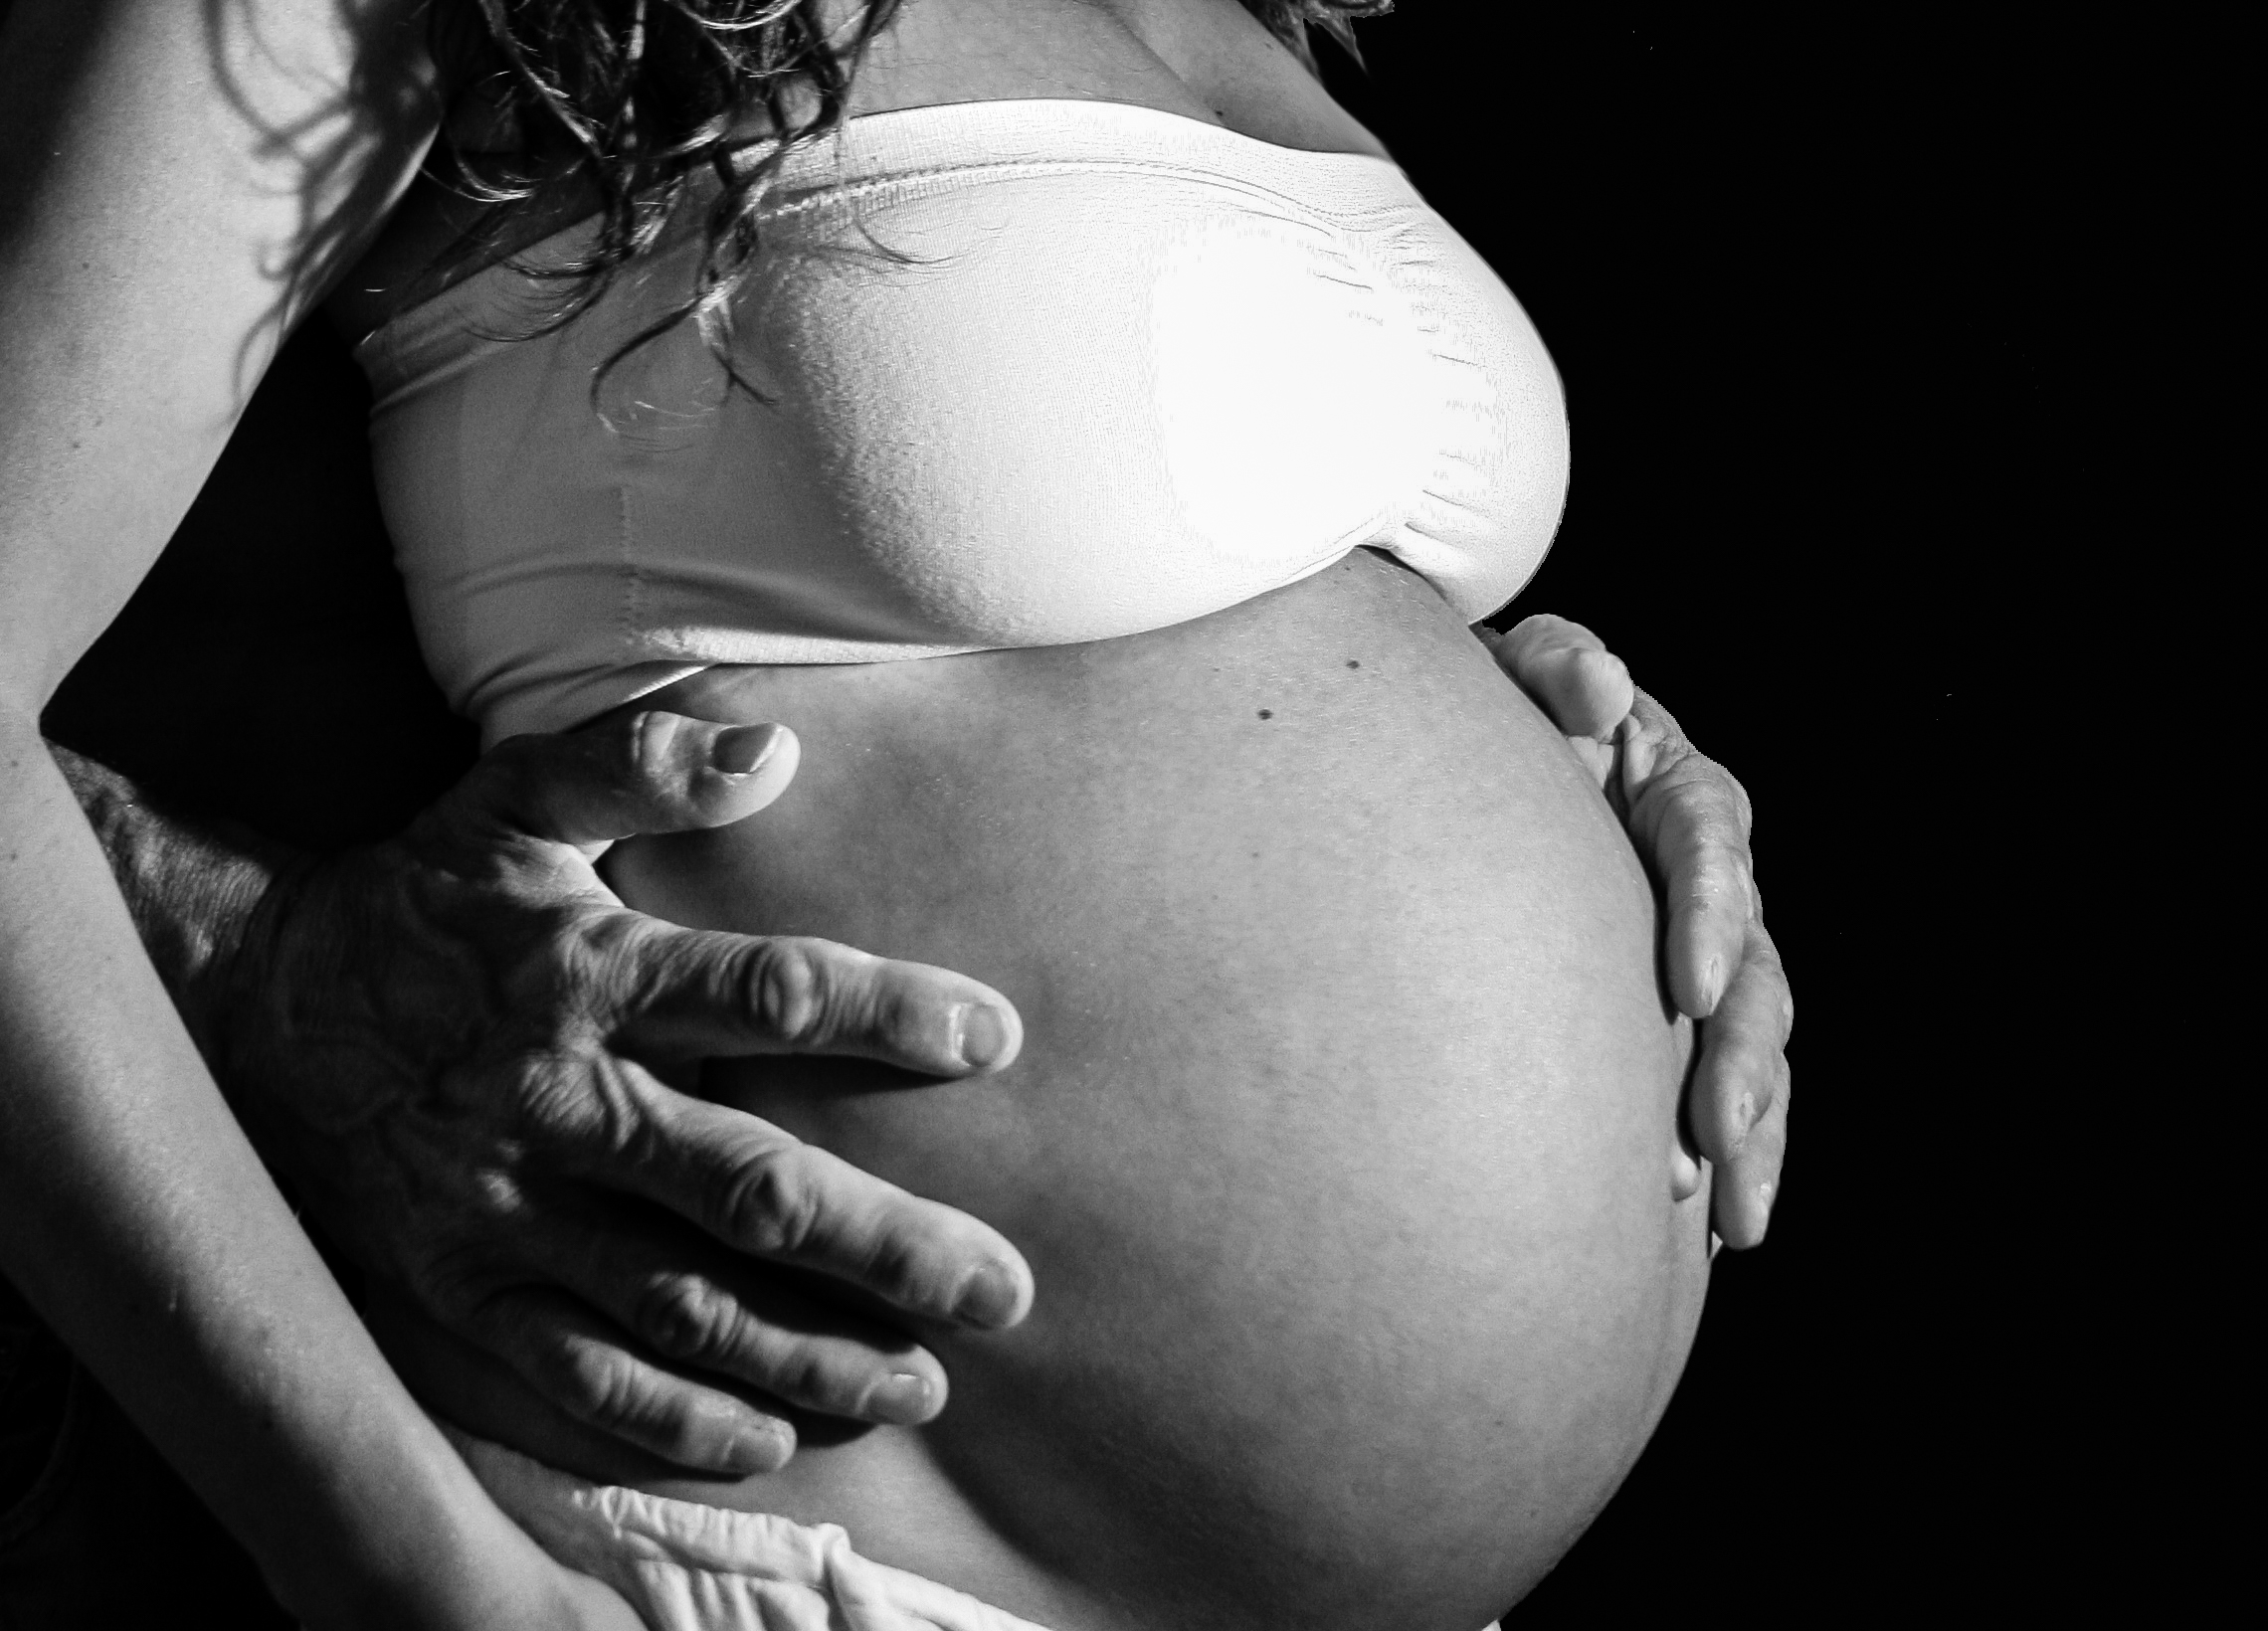 Hands on the stomach of pregnant woman, People, Man, Maternal, Mother, HQ Photo